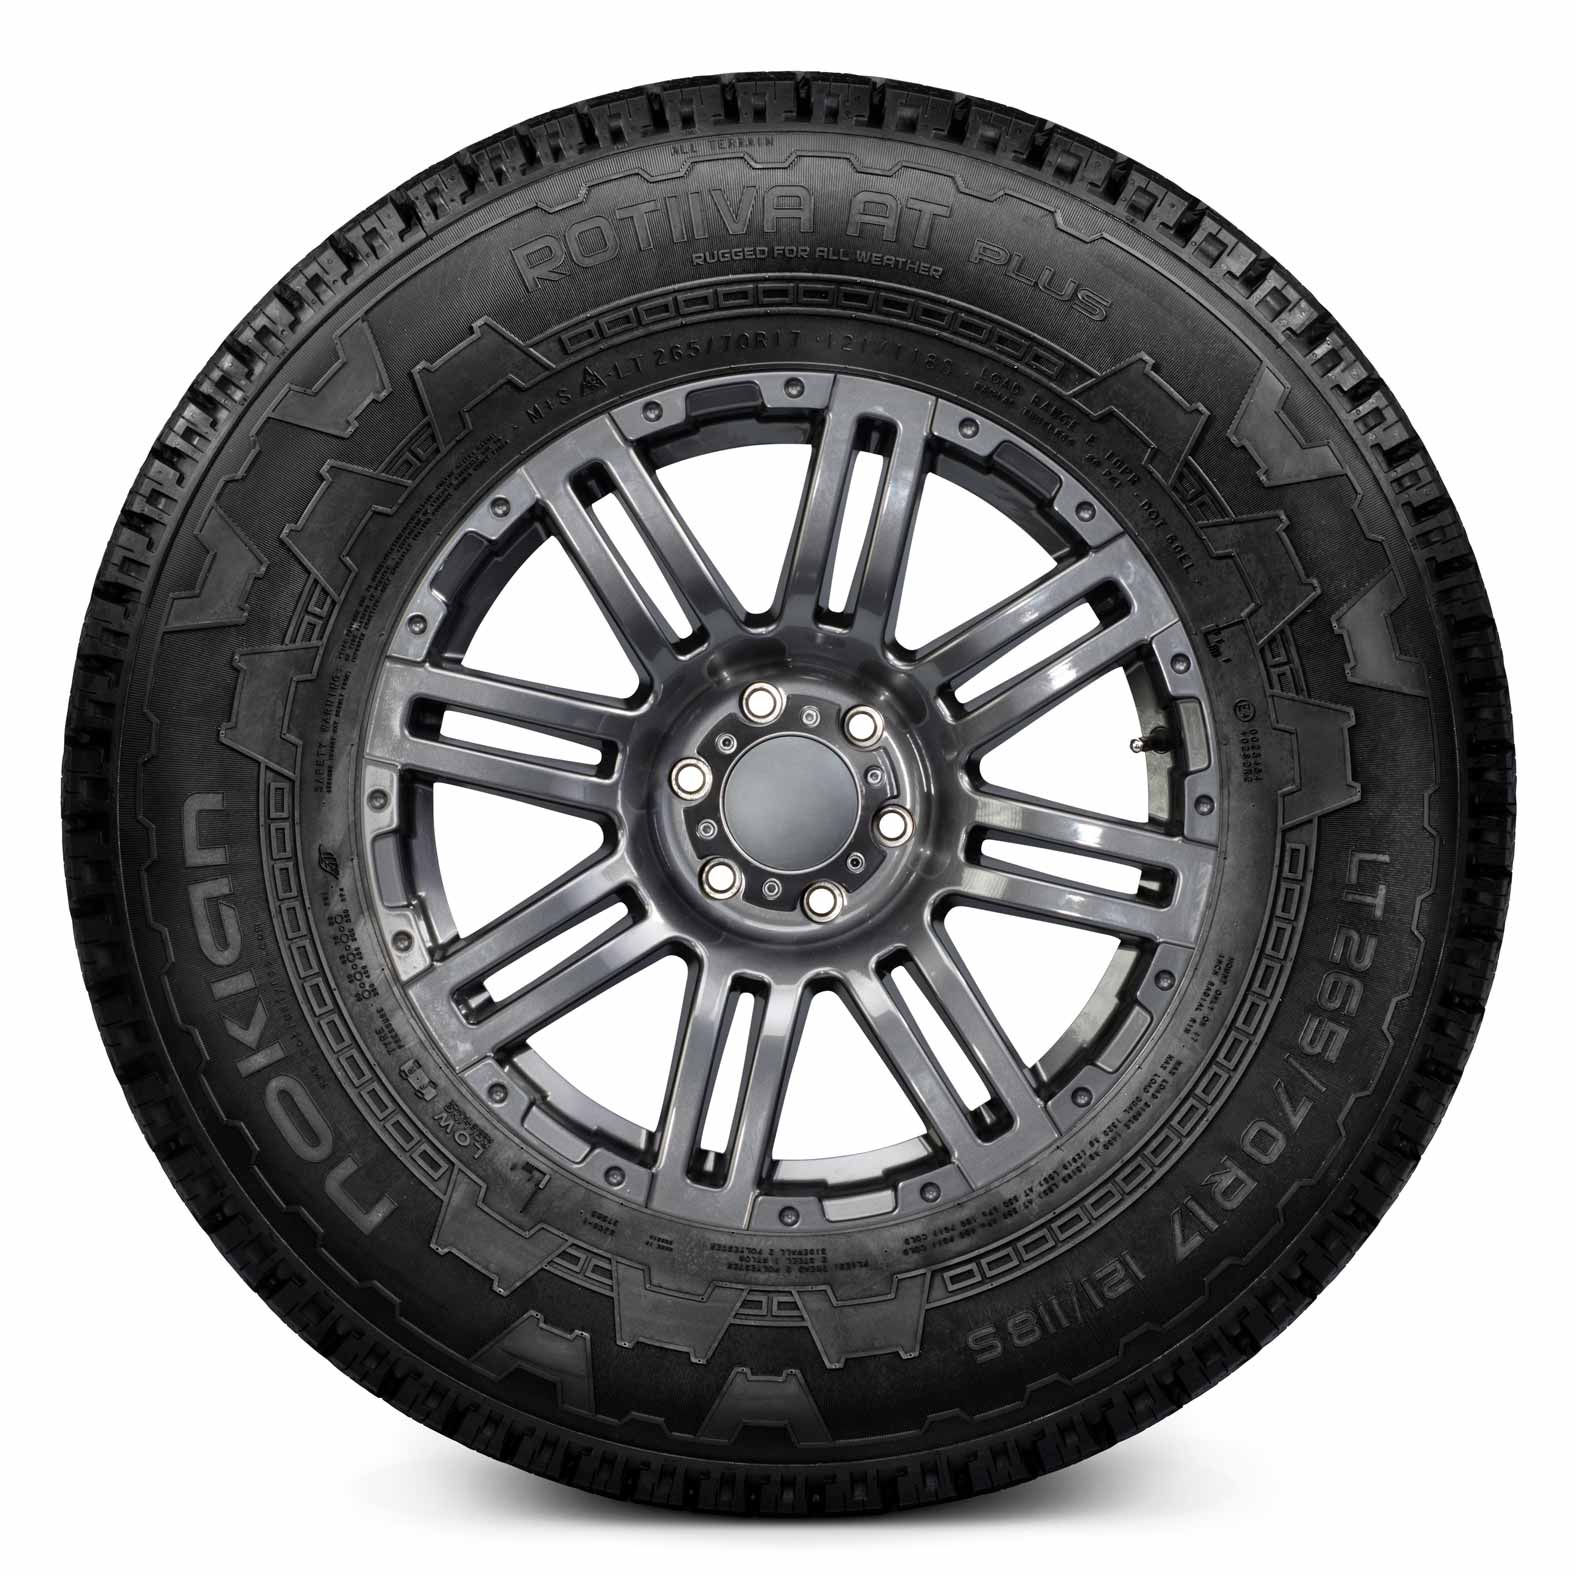 for All-Terrain PLUS | Tires Rotiiva AT Tire Nokian Kal